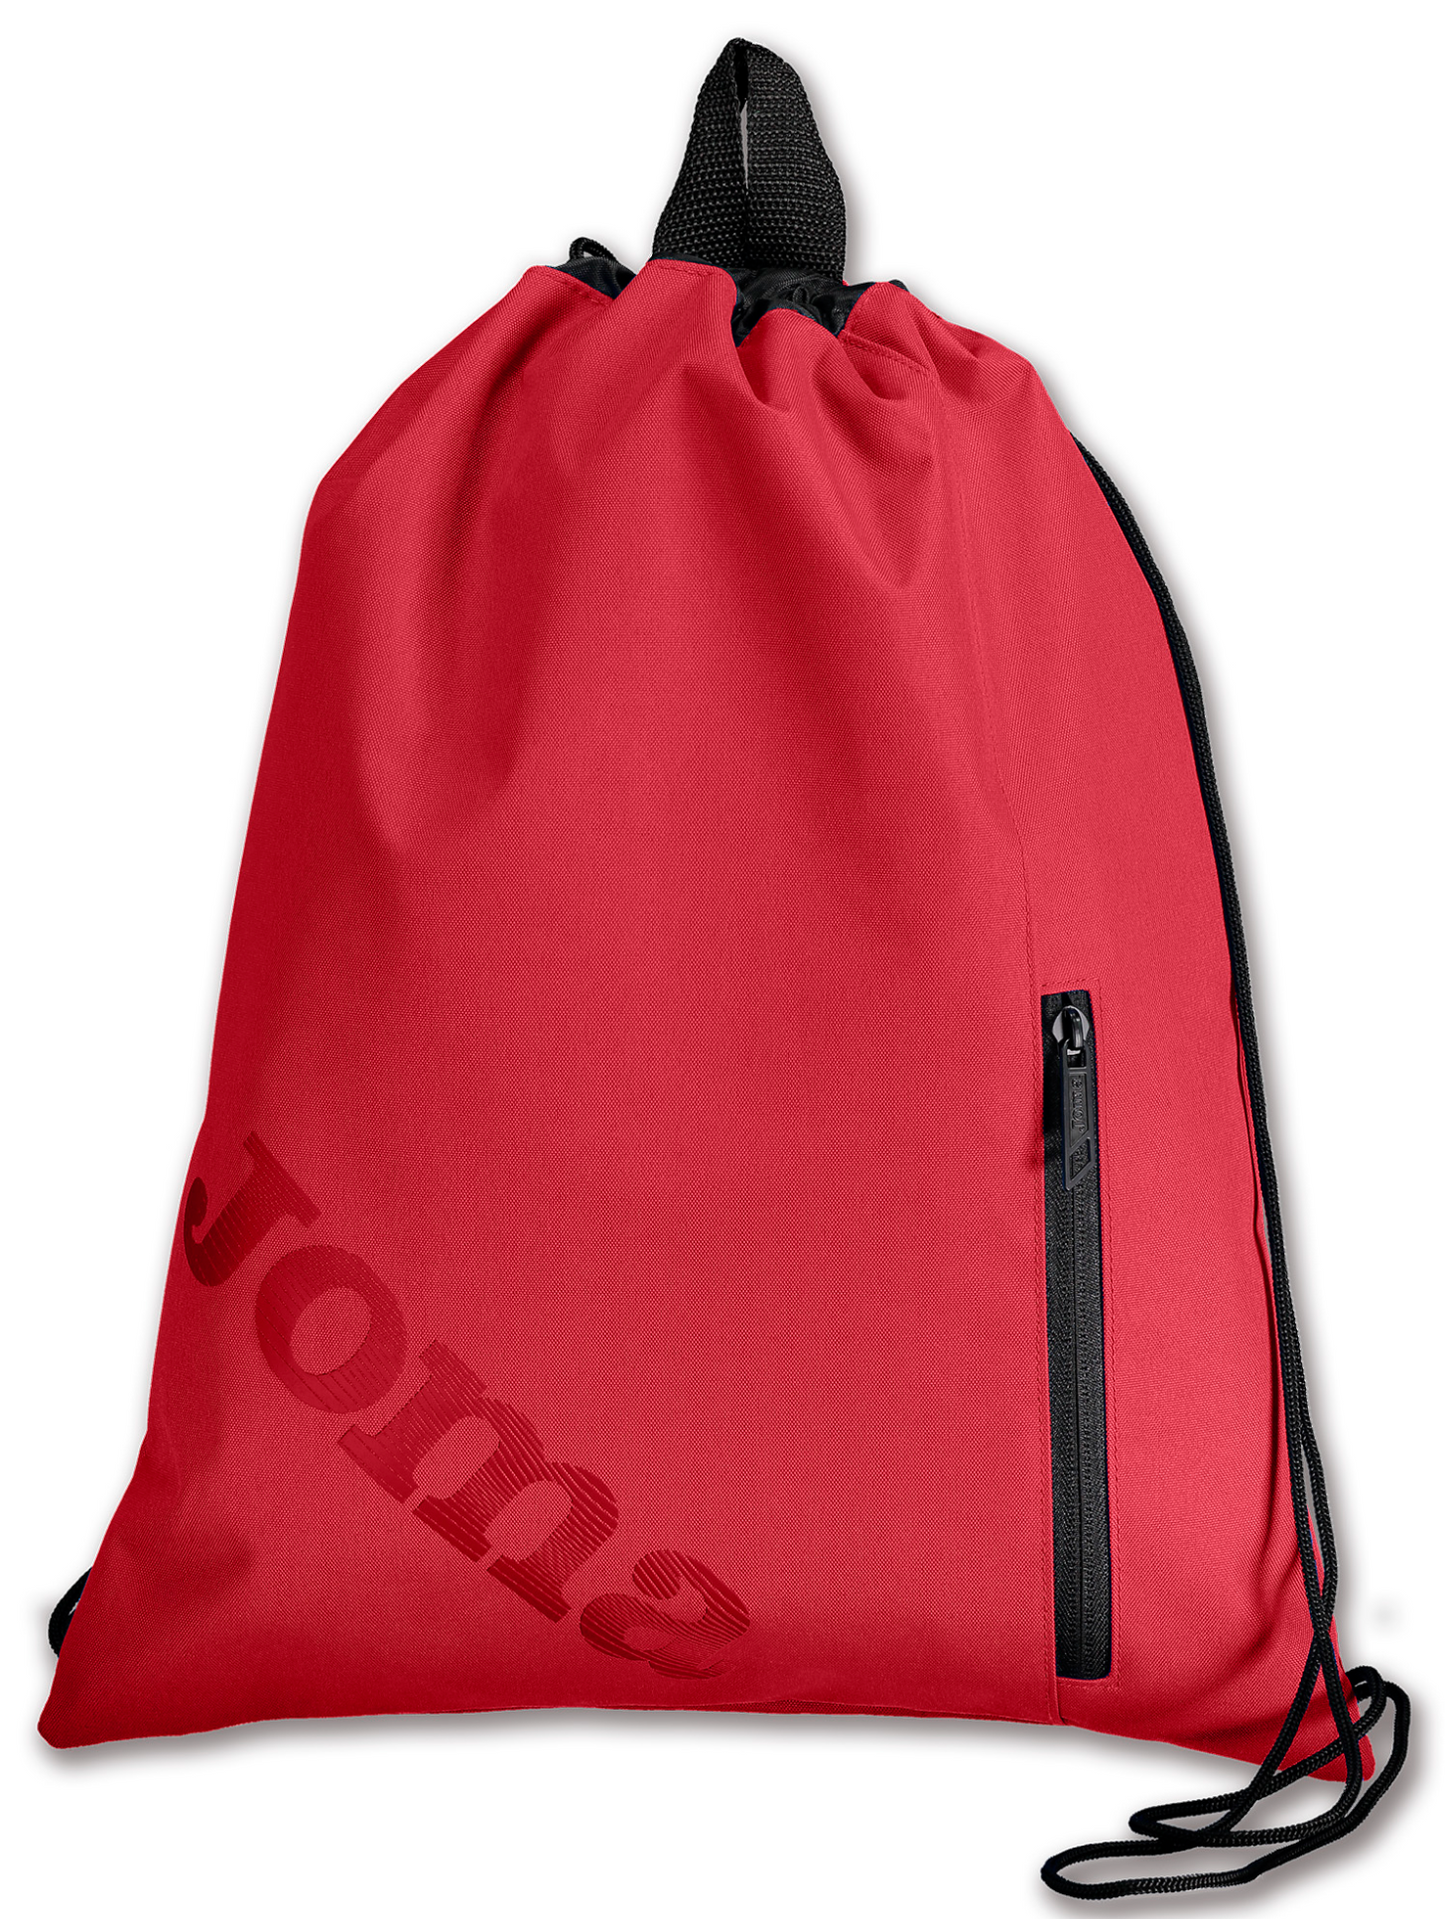 Joma Sackpack-Red